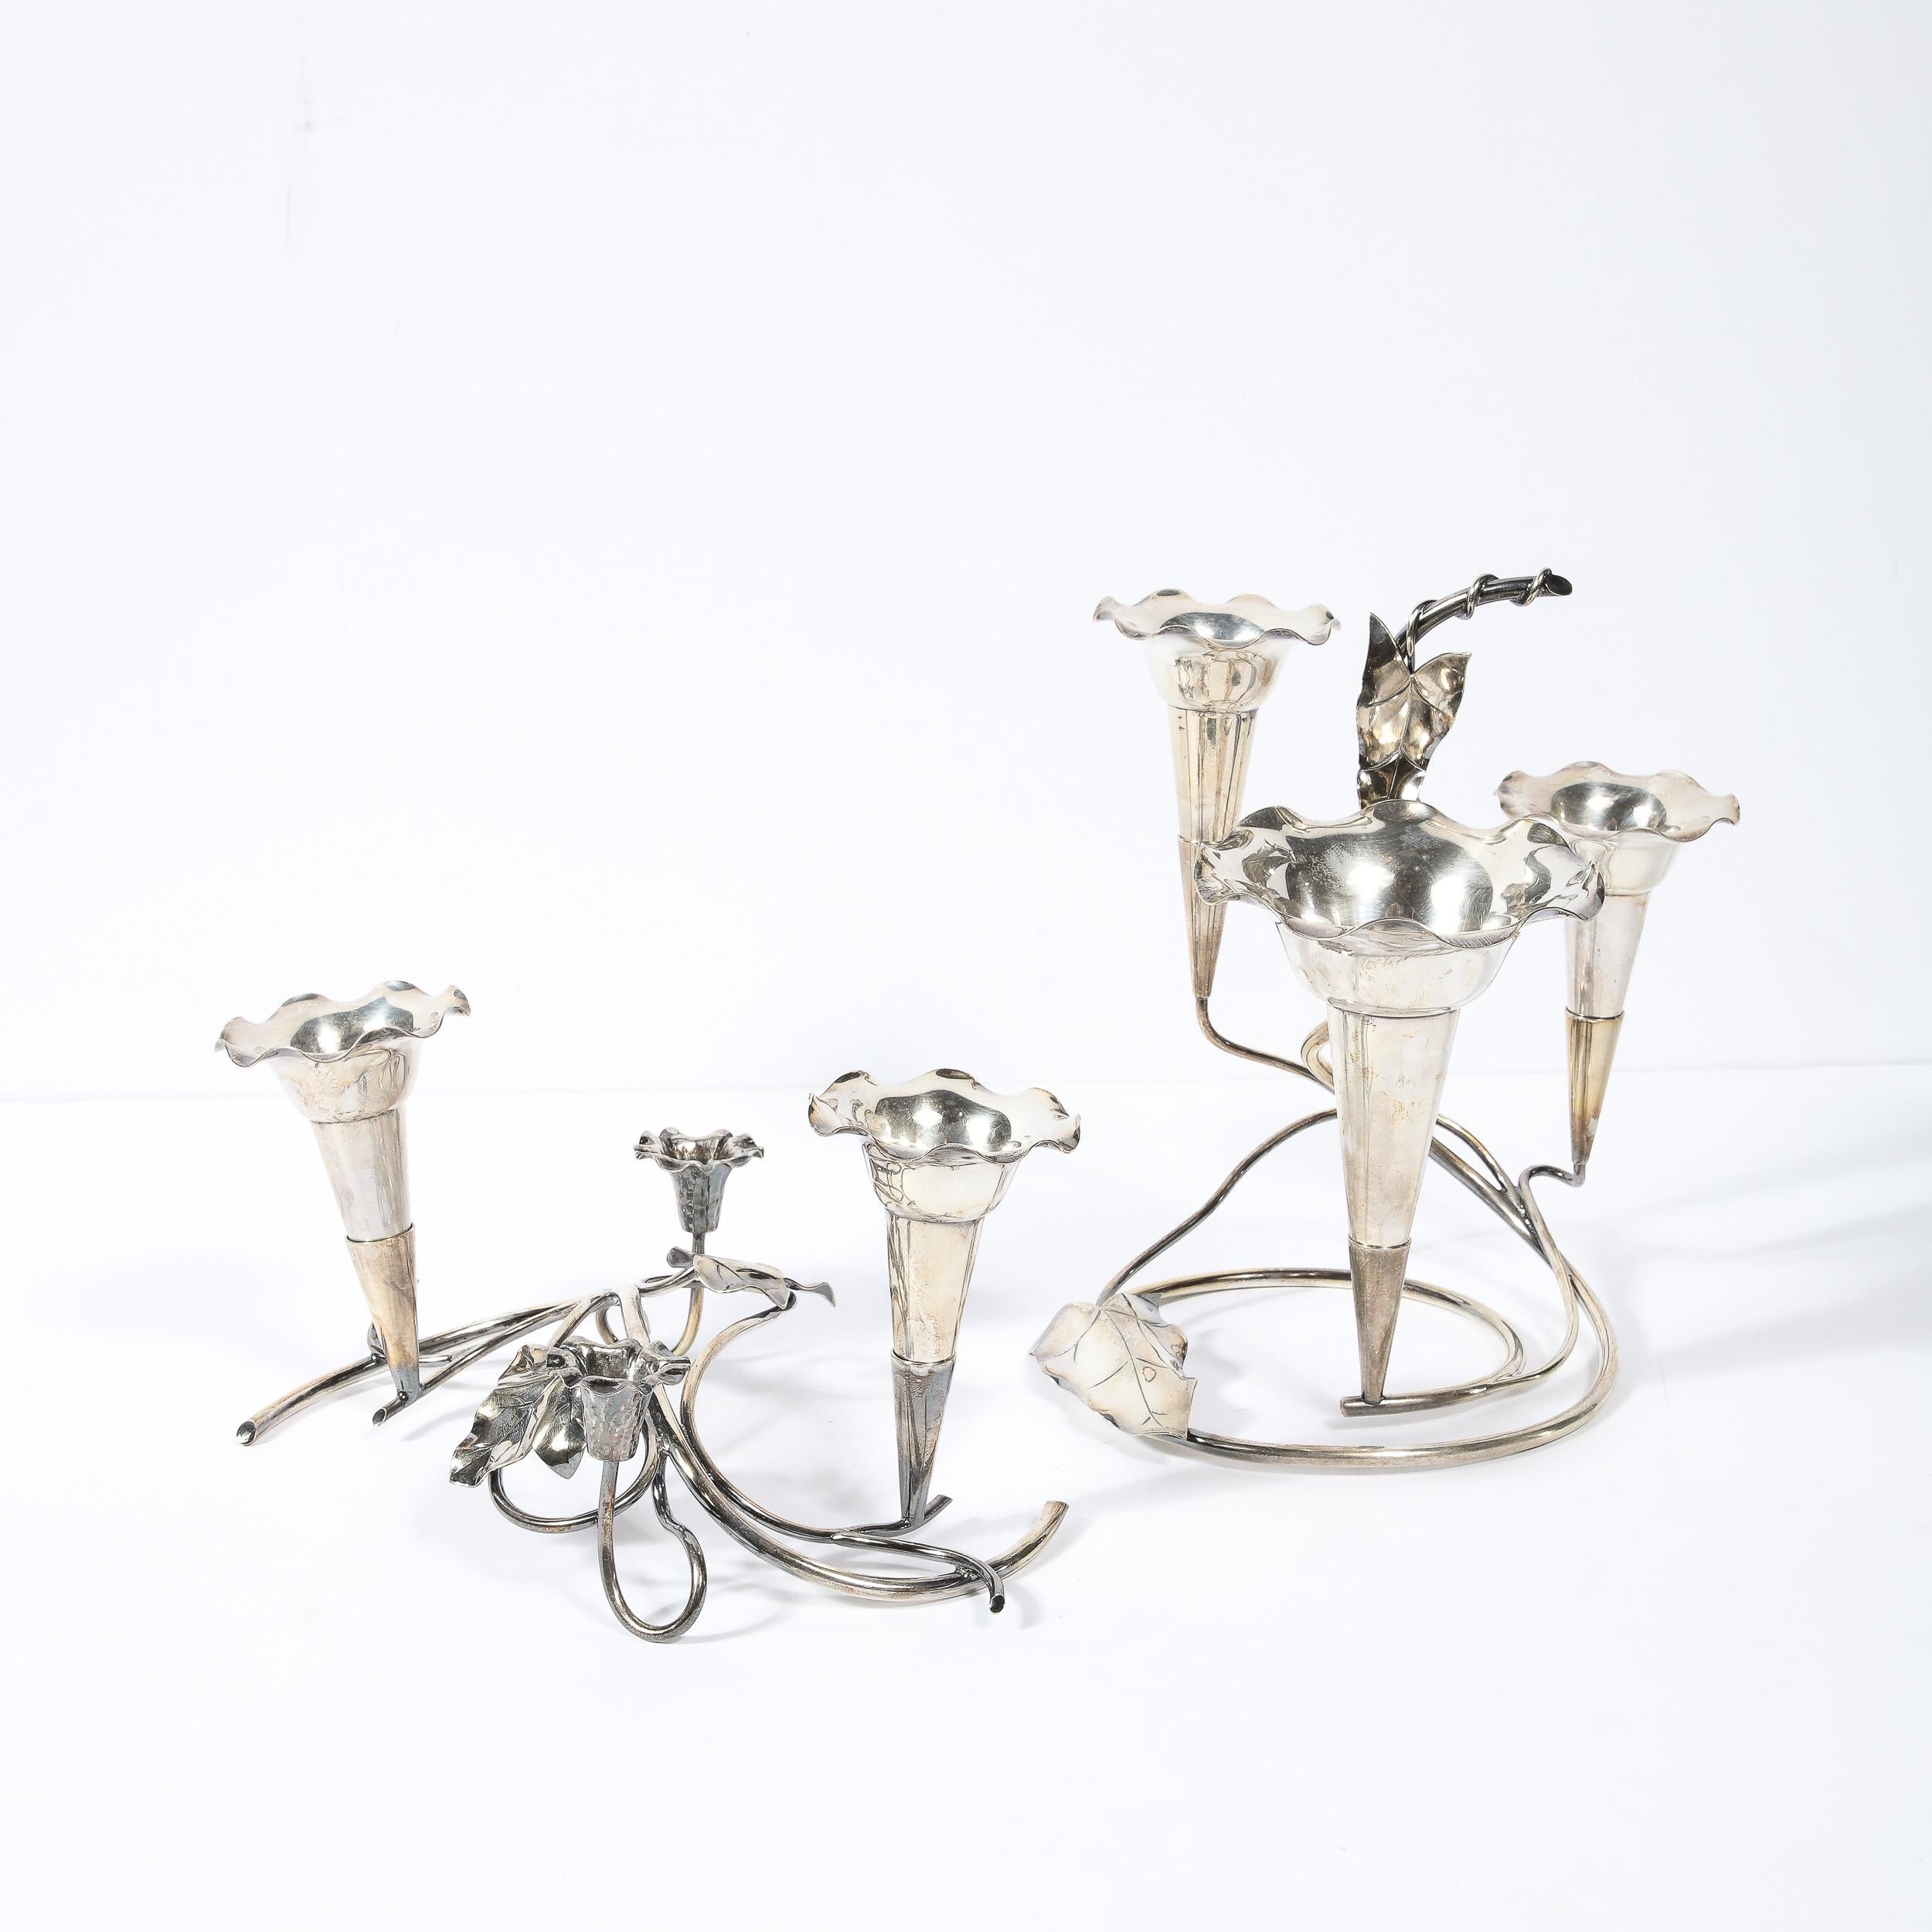 This stunning and sculptural pair of silver-plate Art Nouveau candleholders were realized in the United States circa 1915. They feature a base composed of swirling curvilinear stylized vines (a leitmotif throughout Art Nouveau design) that support